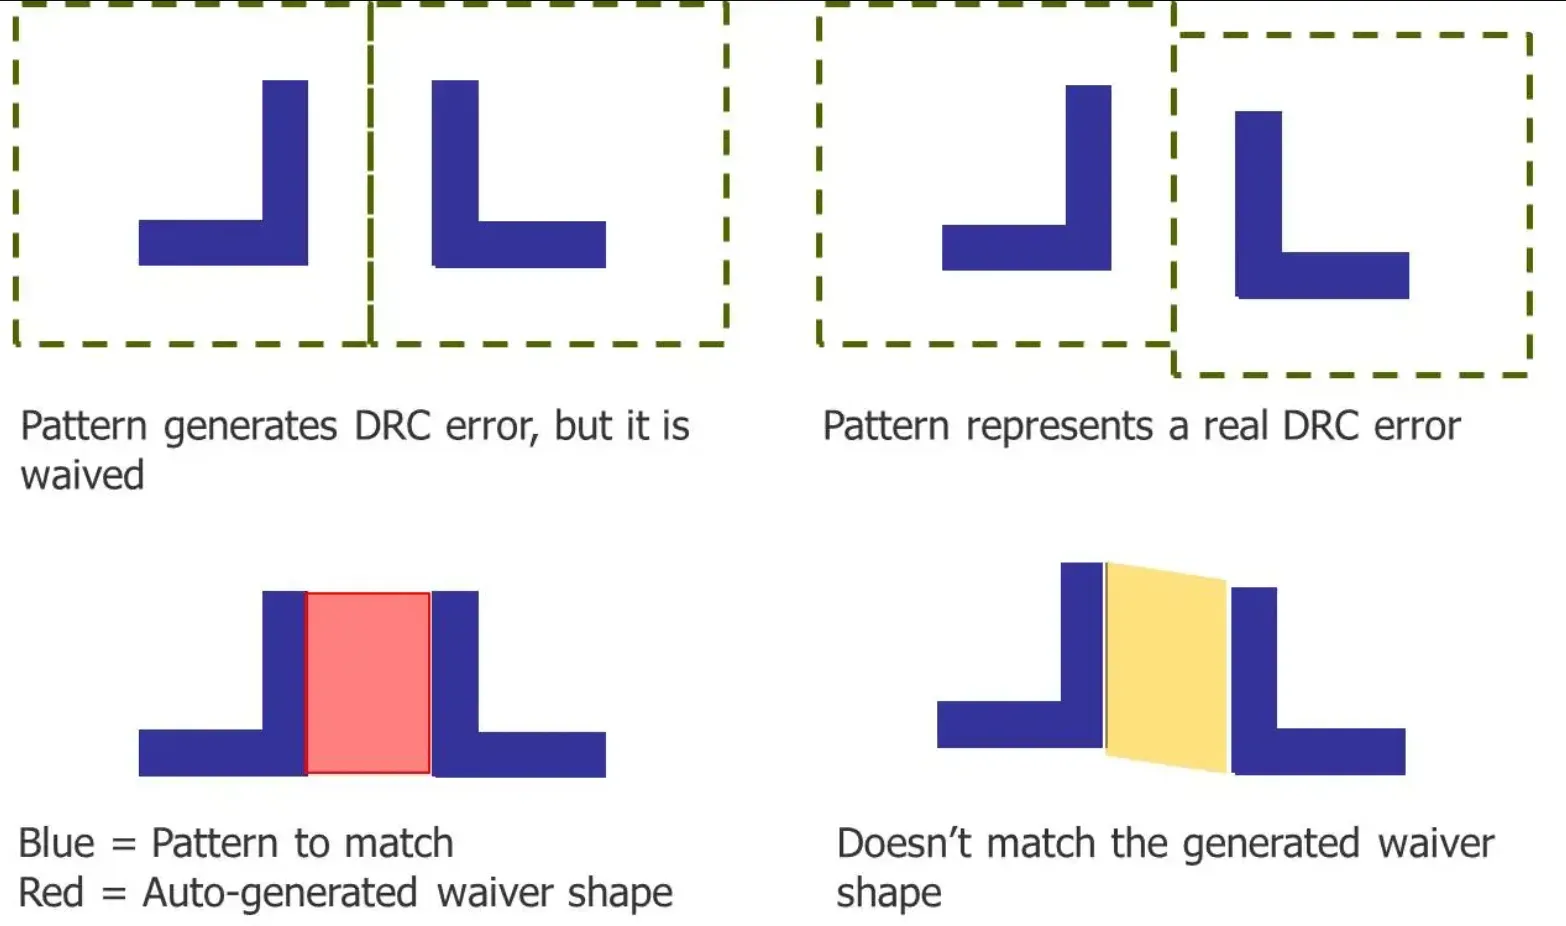 Driving Factors of Pattern Matching